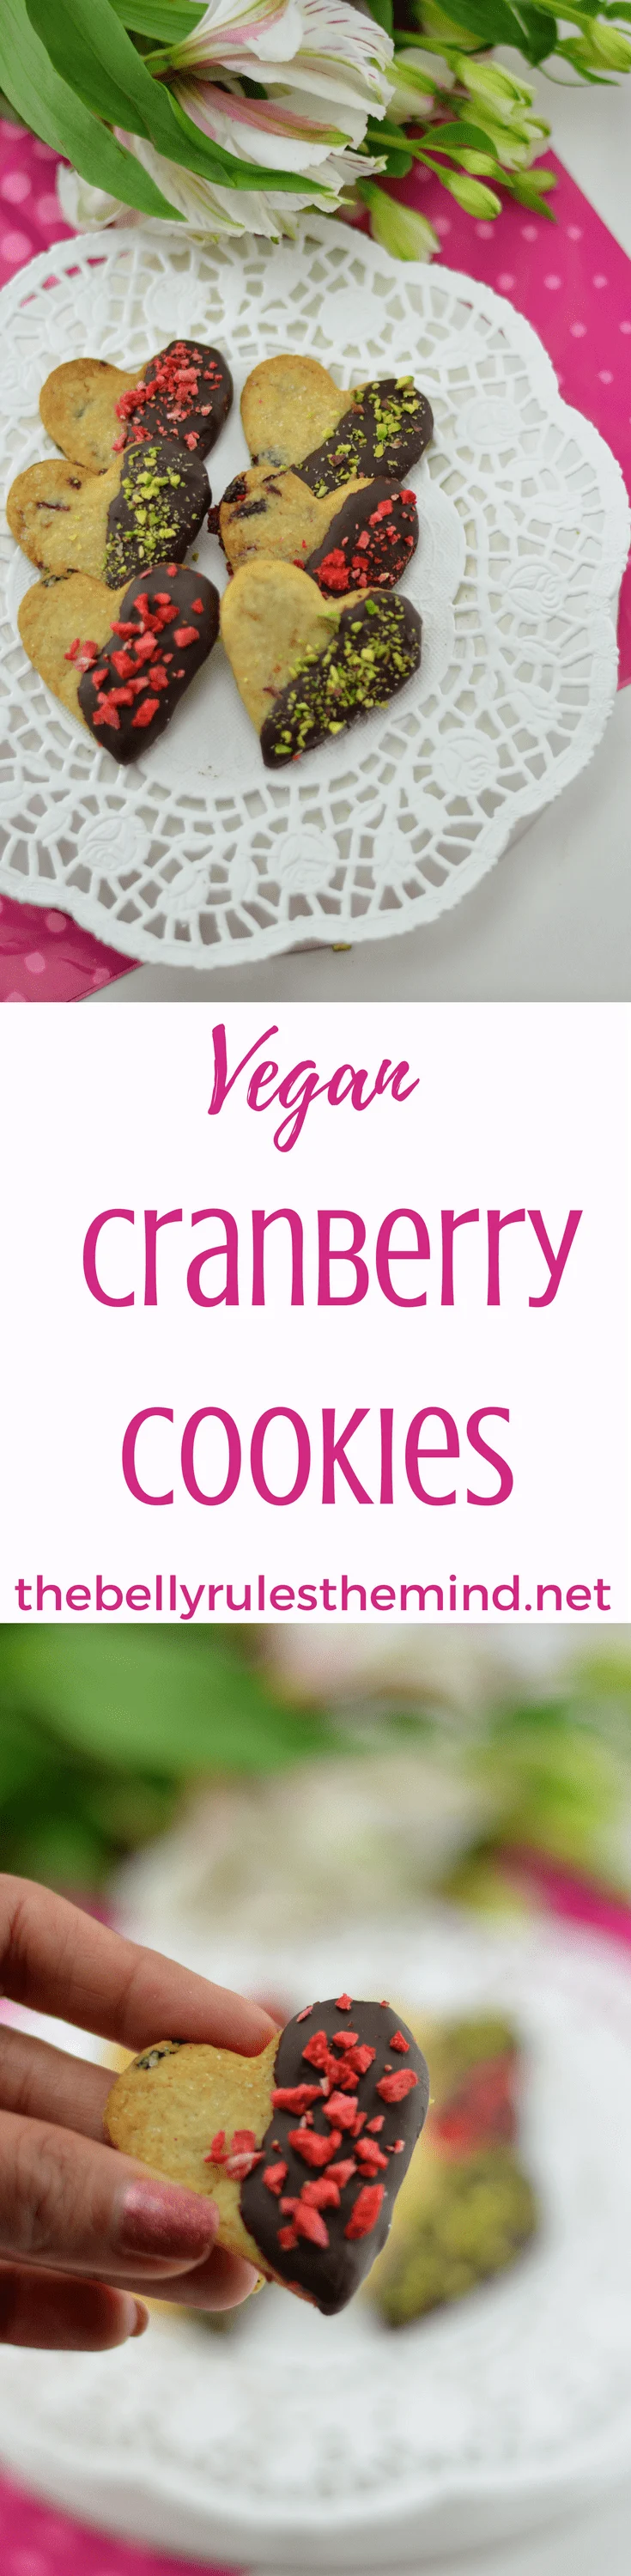 Vegan Cranberry Cookies are brimming with delicious melt-in-your-mouth flavors. Dress them up with some sugar or keep them pure and simple. Absolutely addictive.- They're easier to make than you might think! Yet another Valentine's Day and yet another way to let your loved ones know about how much you care.Vegan.|https;//www.thebellyrulestheind.net @bellyrulesdmind